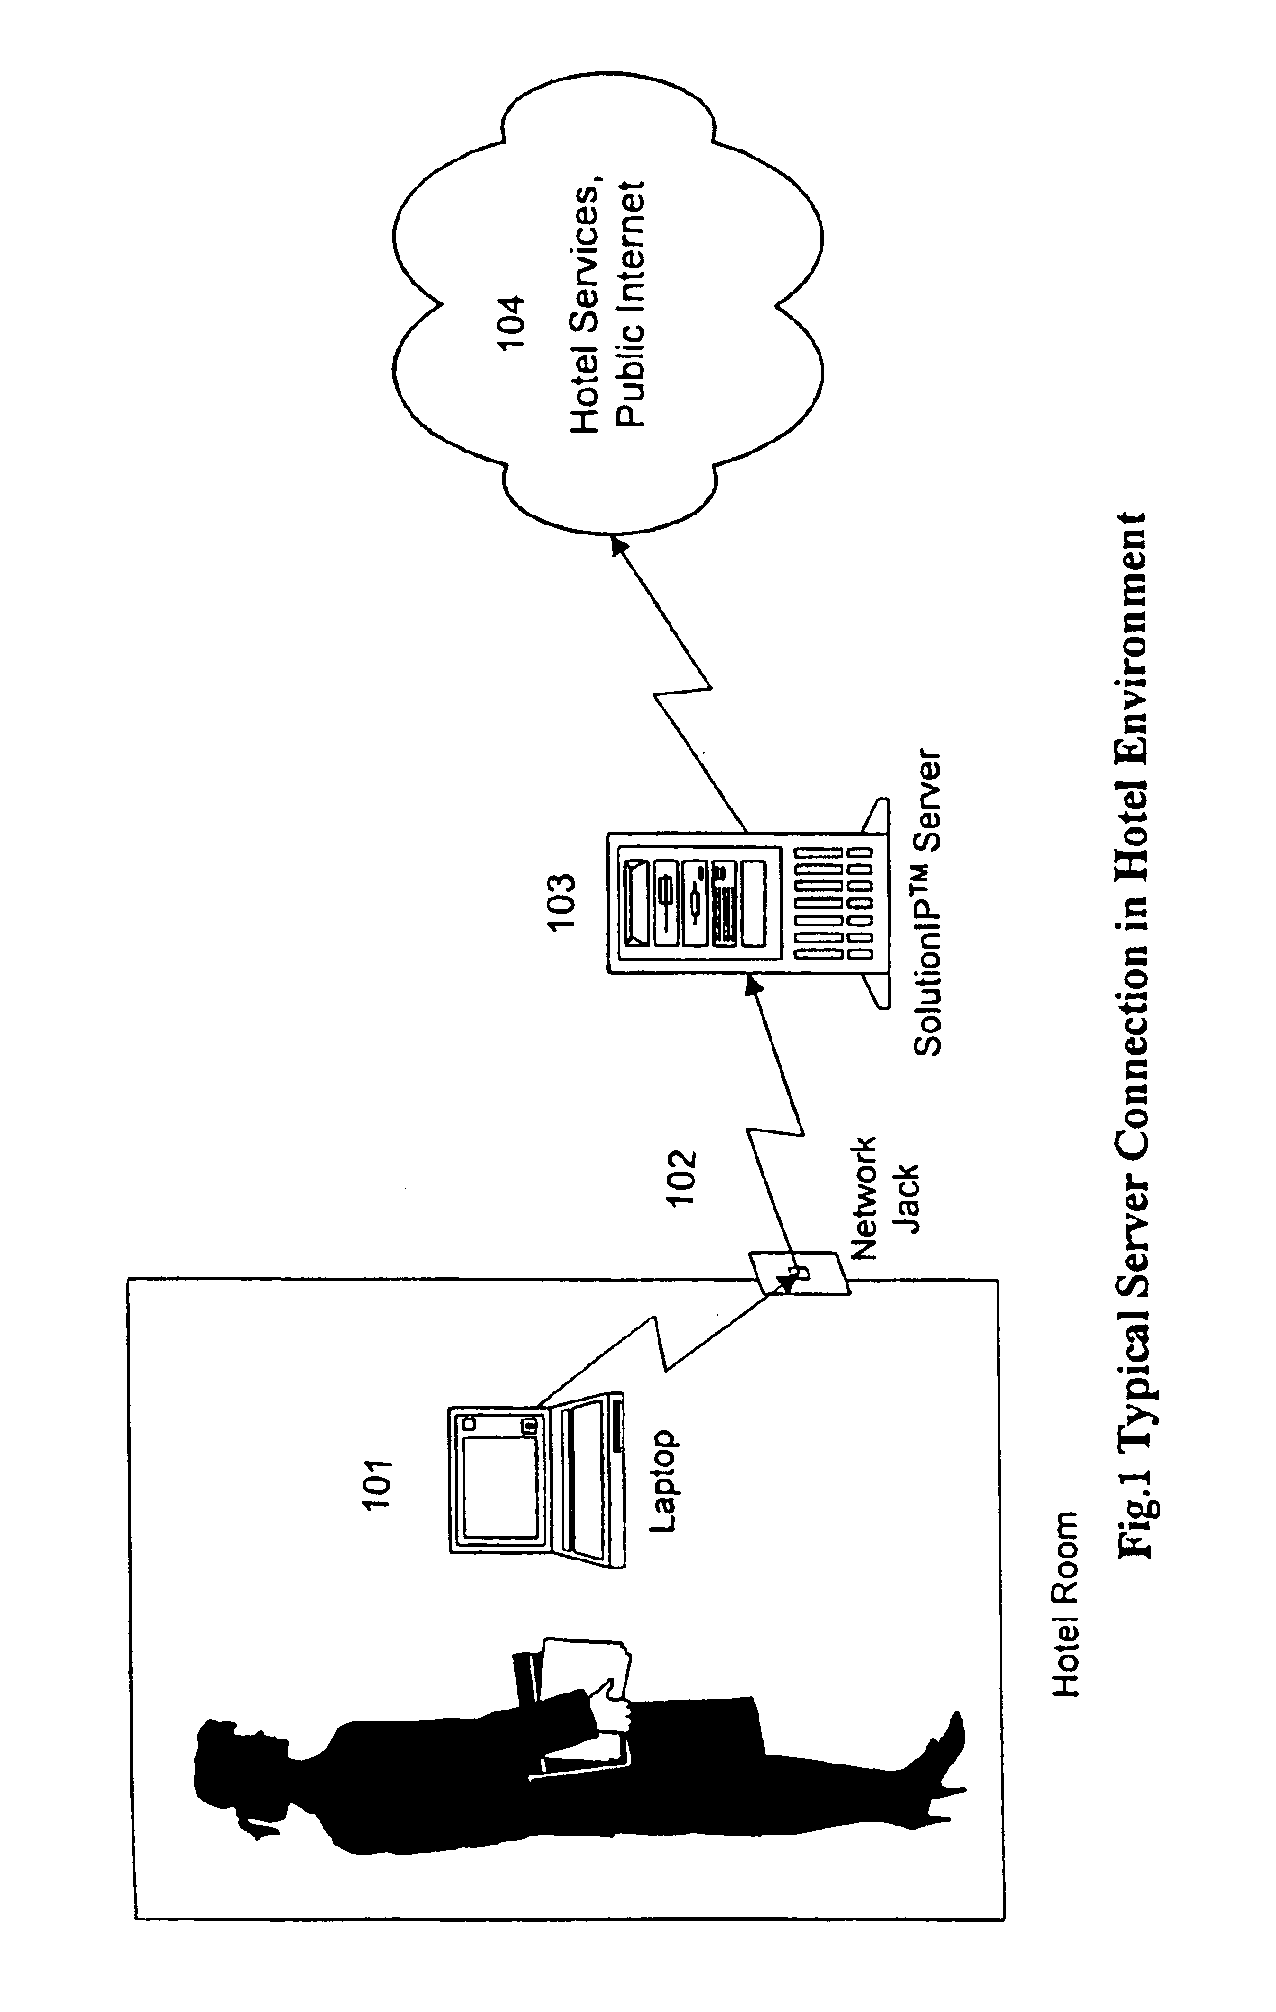 System for reconfiguring and registering a new IP address for a computer to access a different network without user intervention